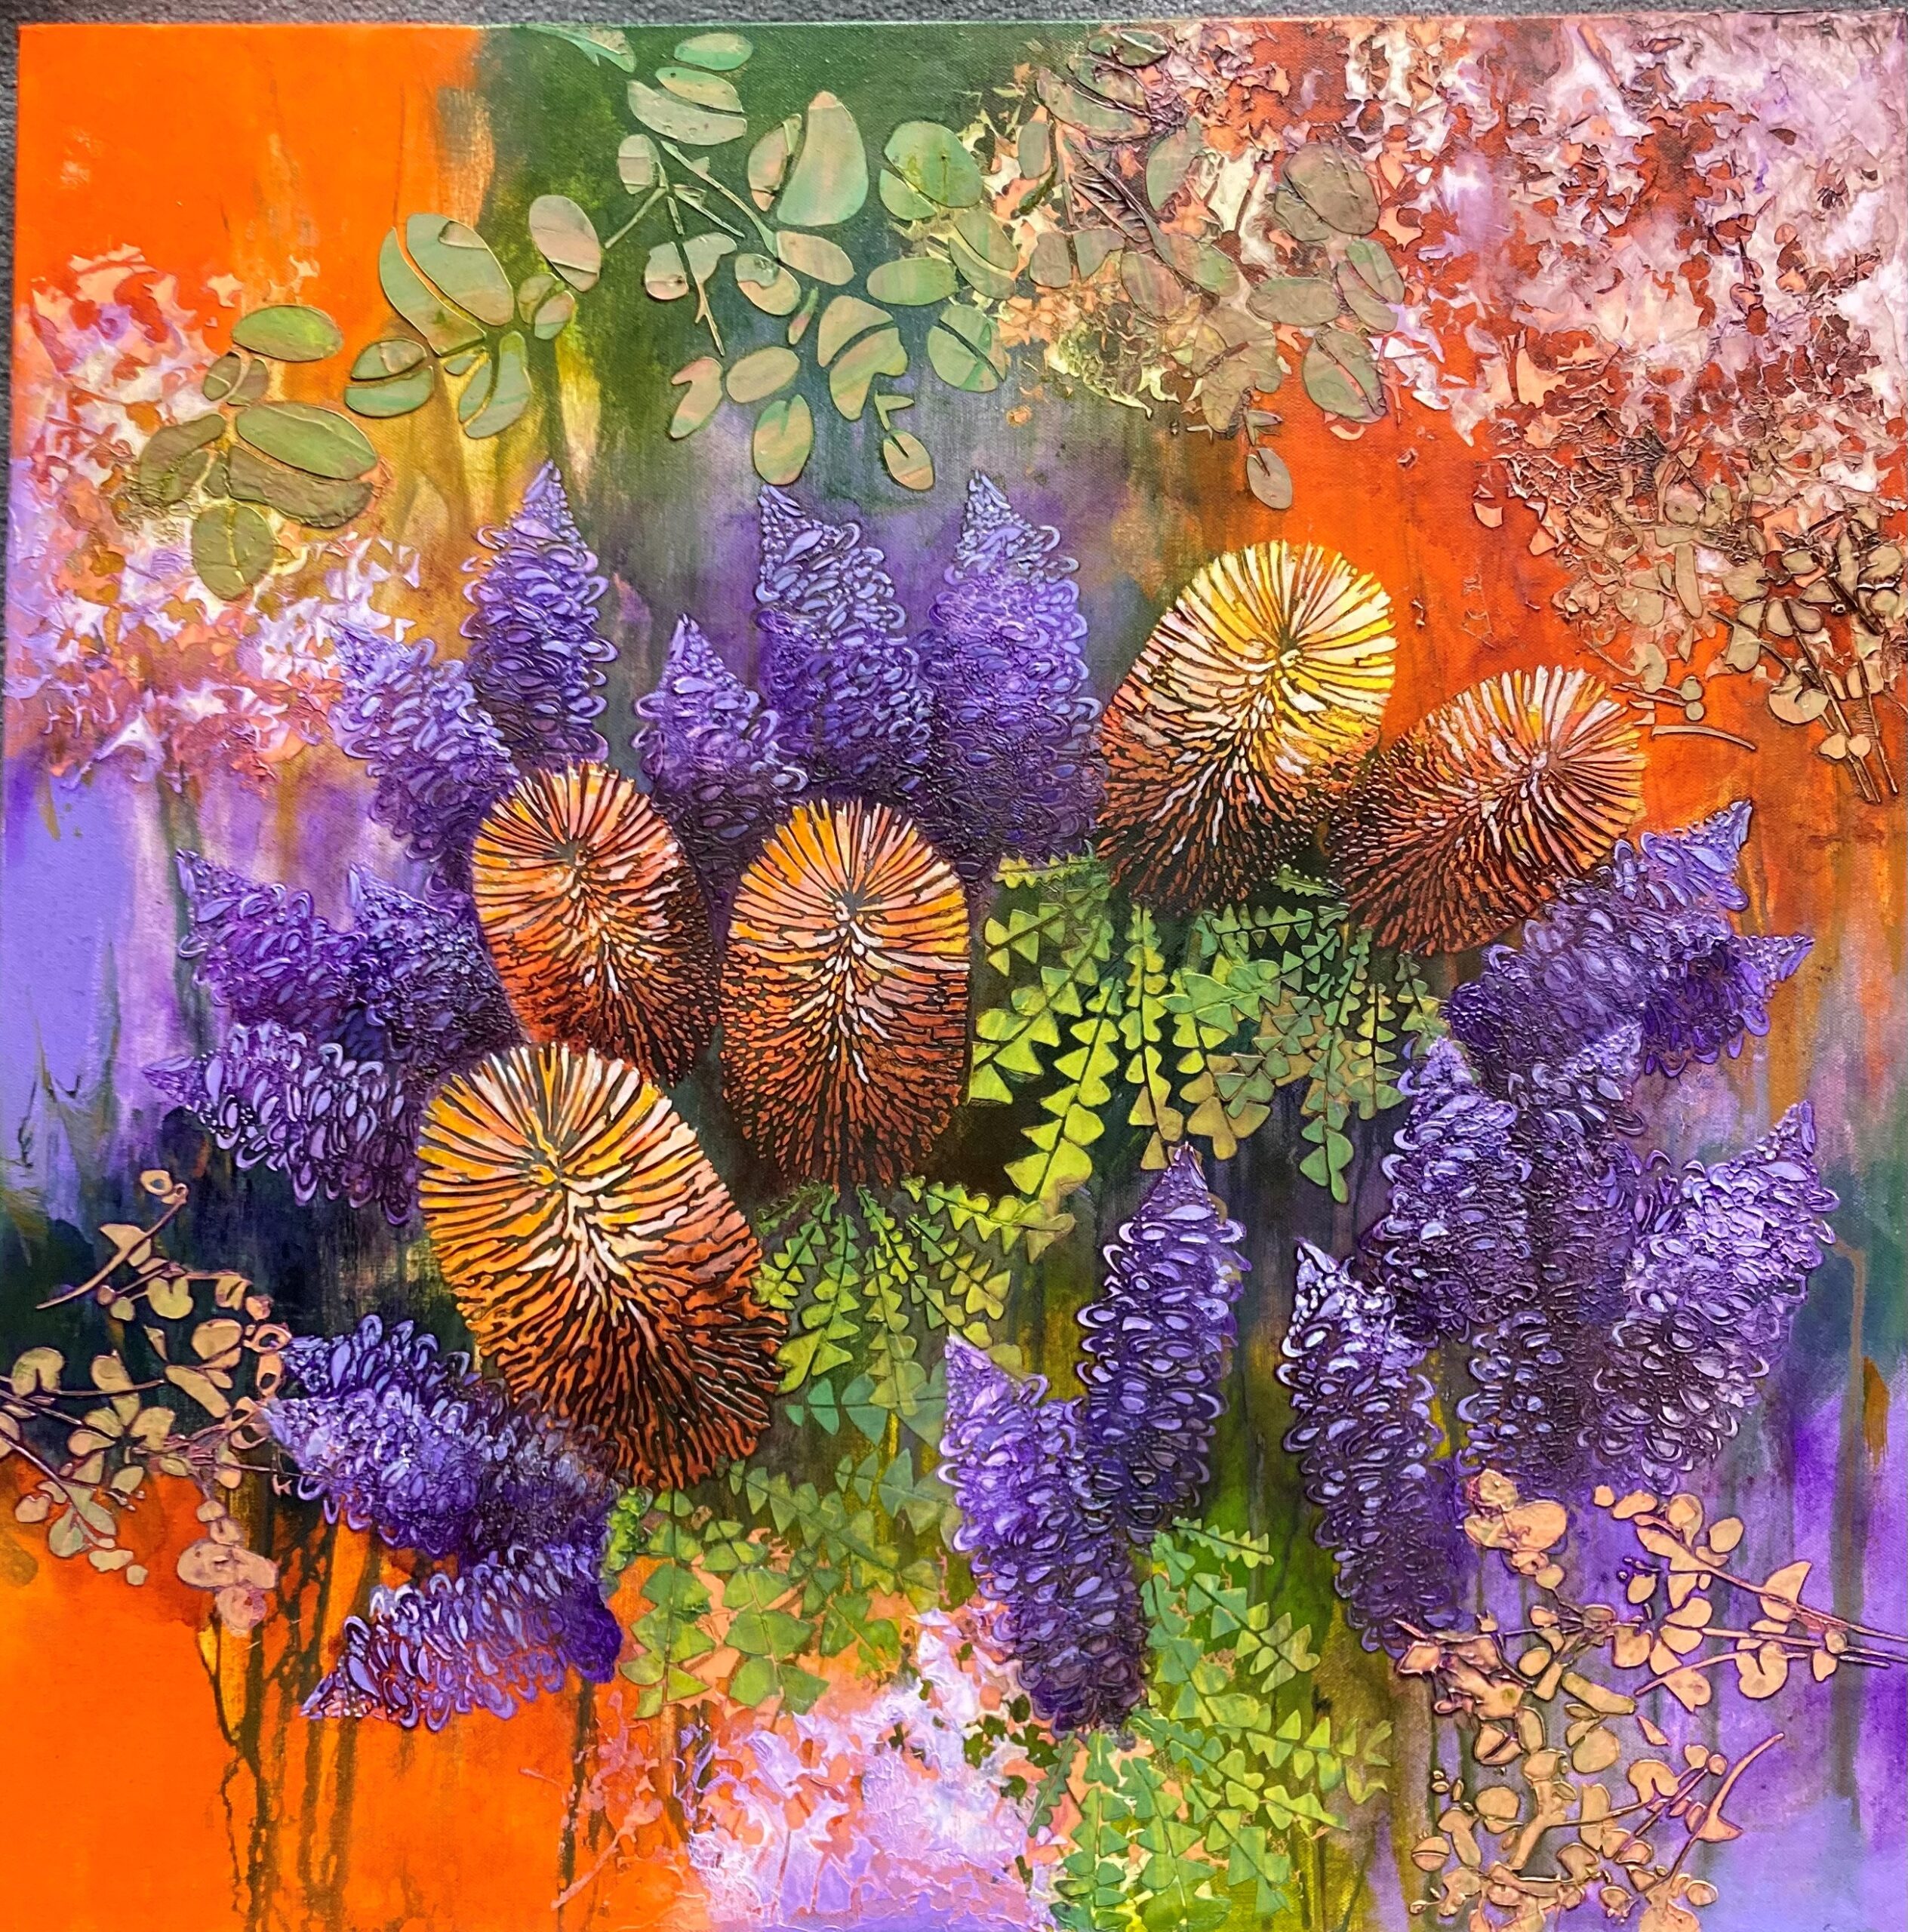 Image shows an abstract painting of banksia flowers for the Exhibition News Unveiling Imagine The Launceston Art Society's Premier Exhibition Art Trails Tasmania